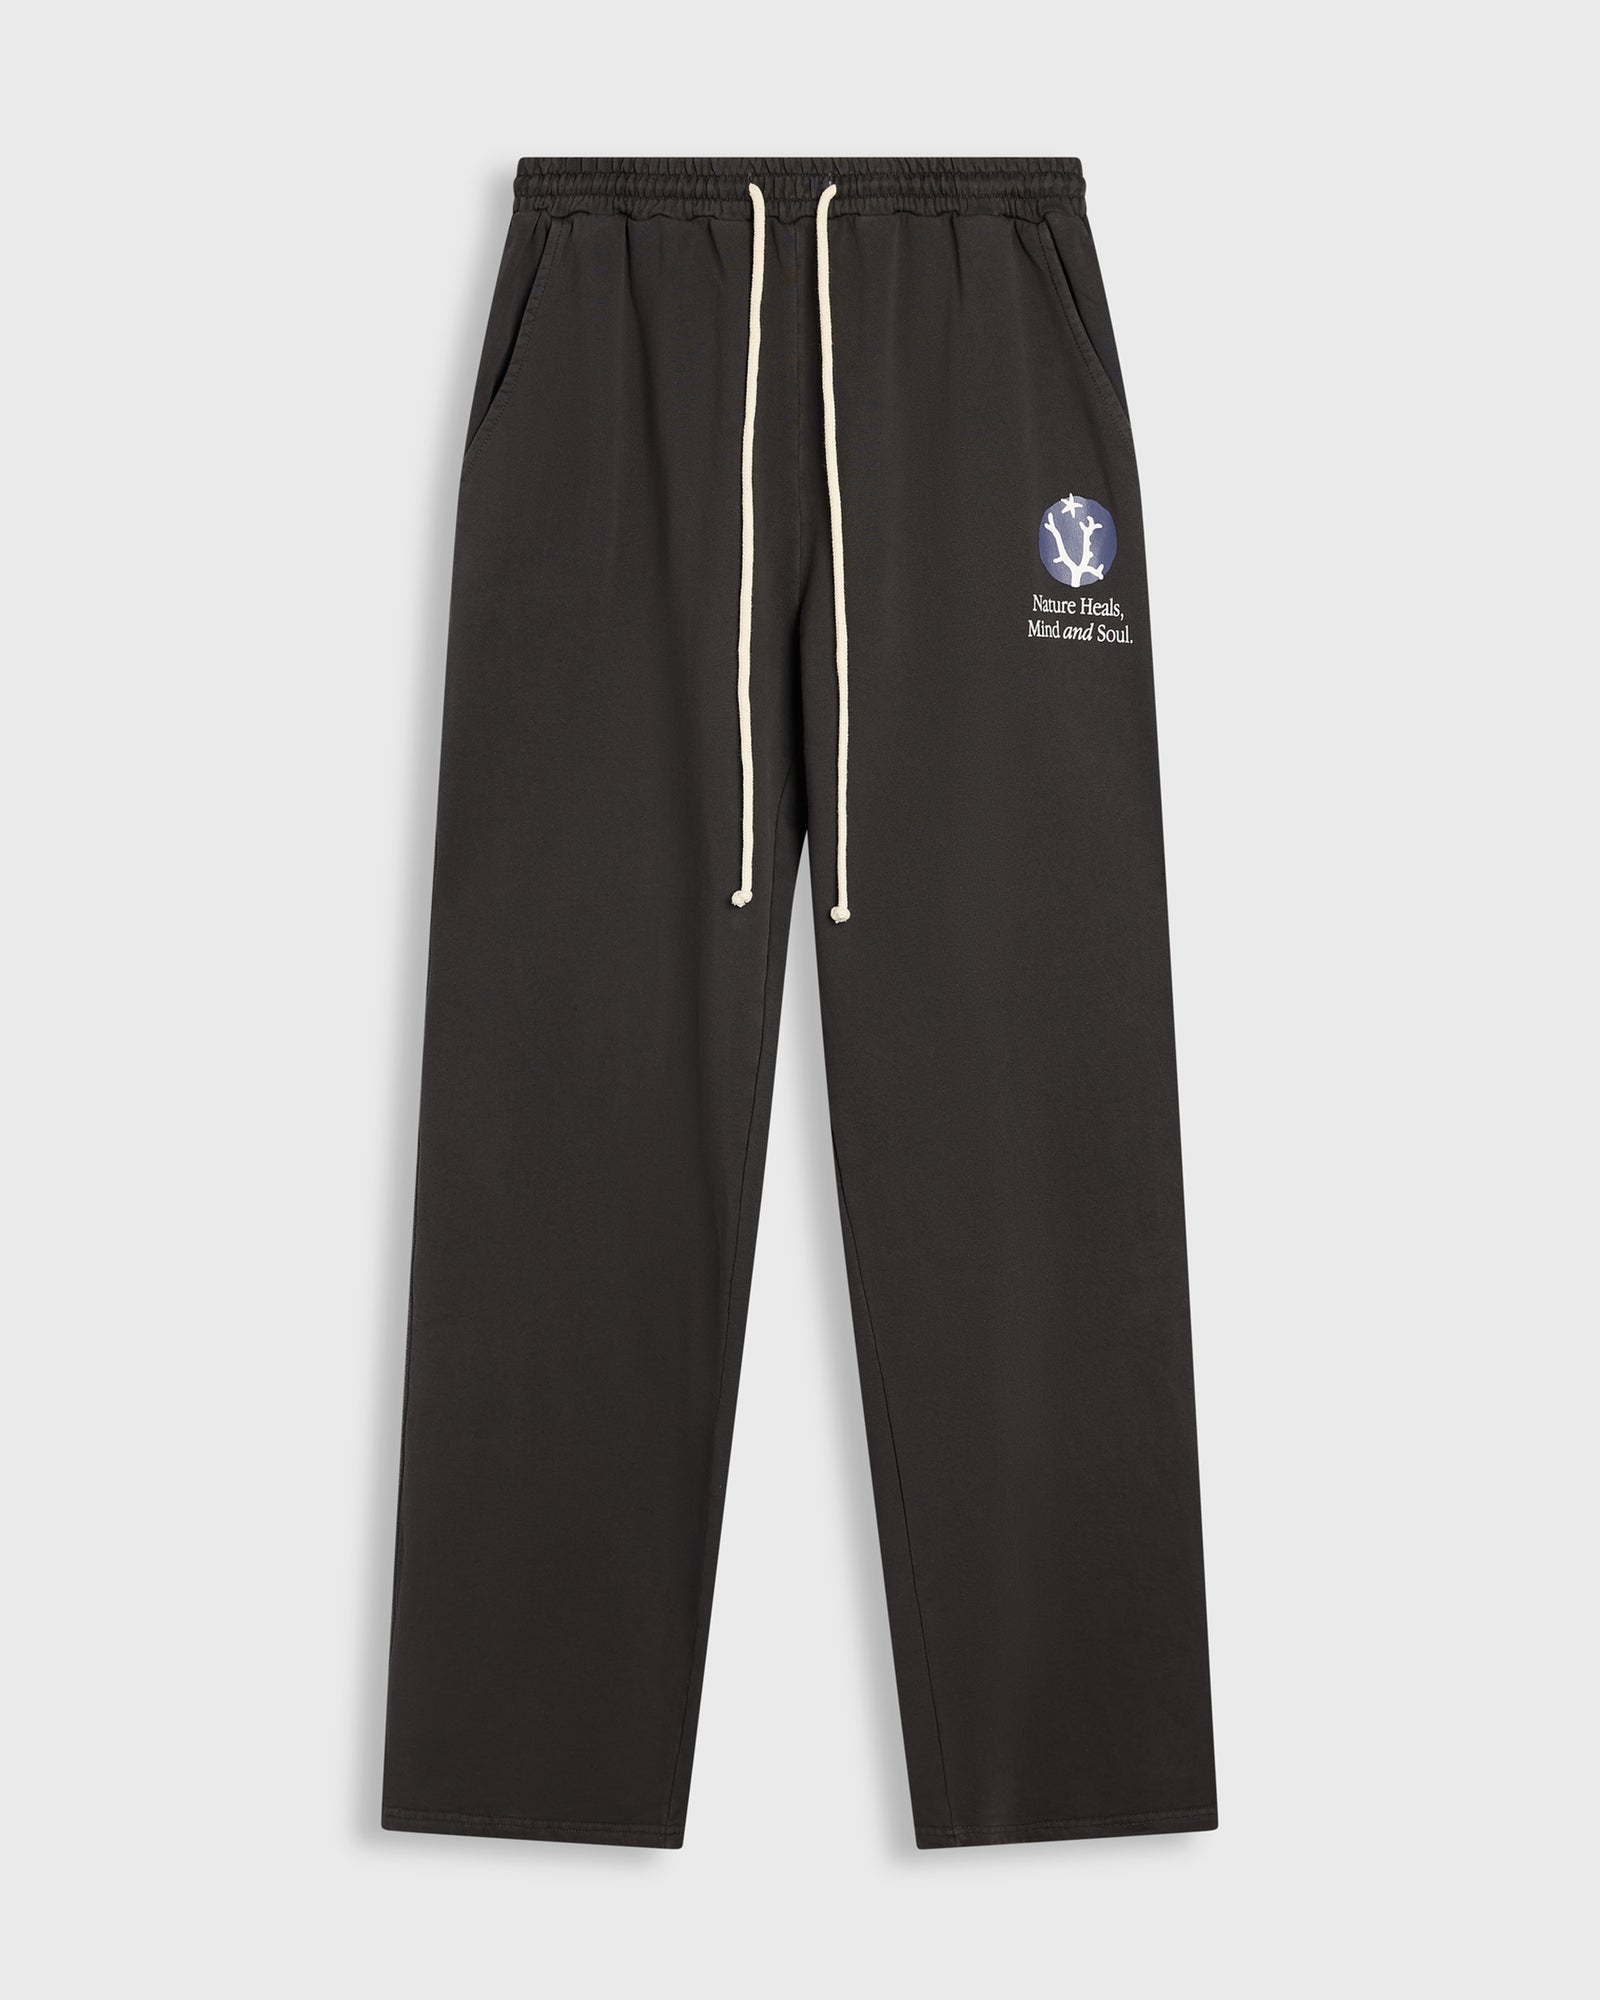 black straight leg sweat pants nature heals mind and soul graphic - sweatpants by Krost NY